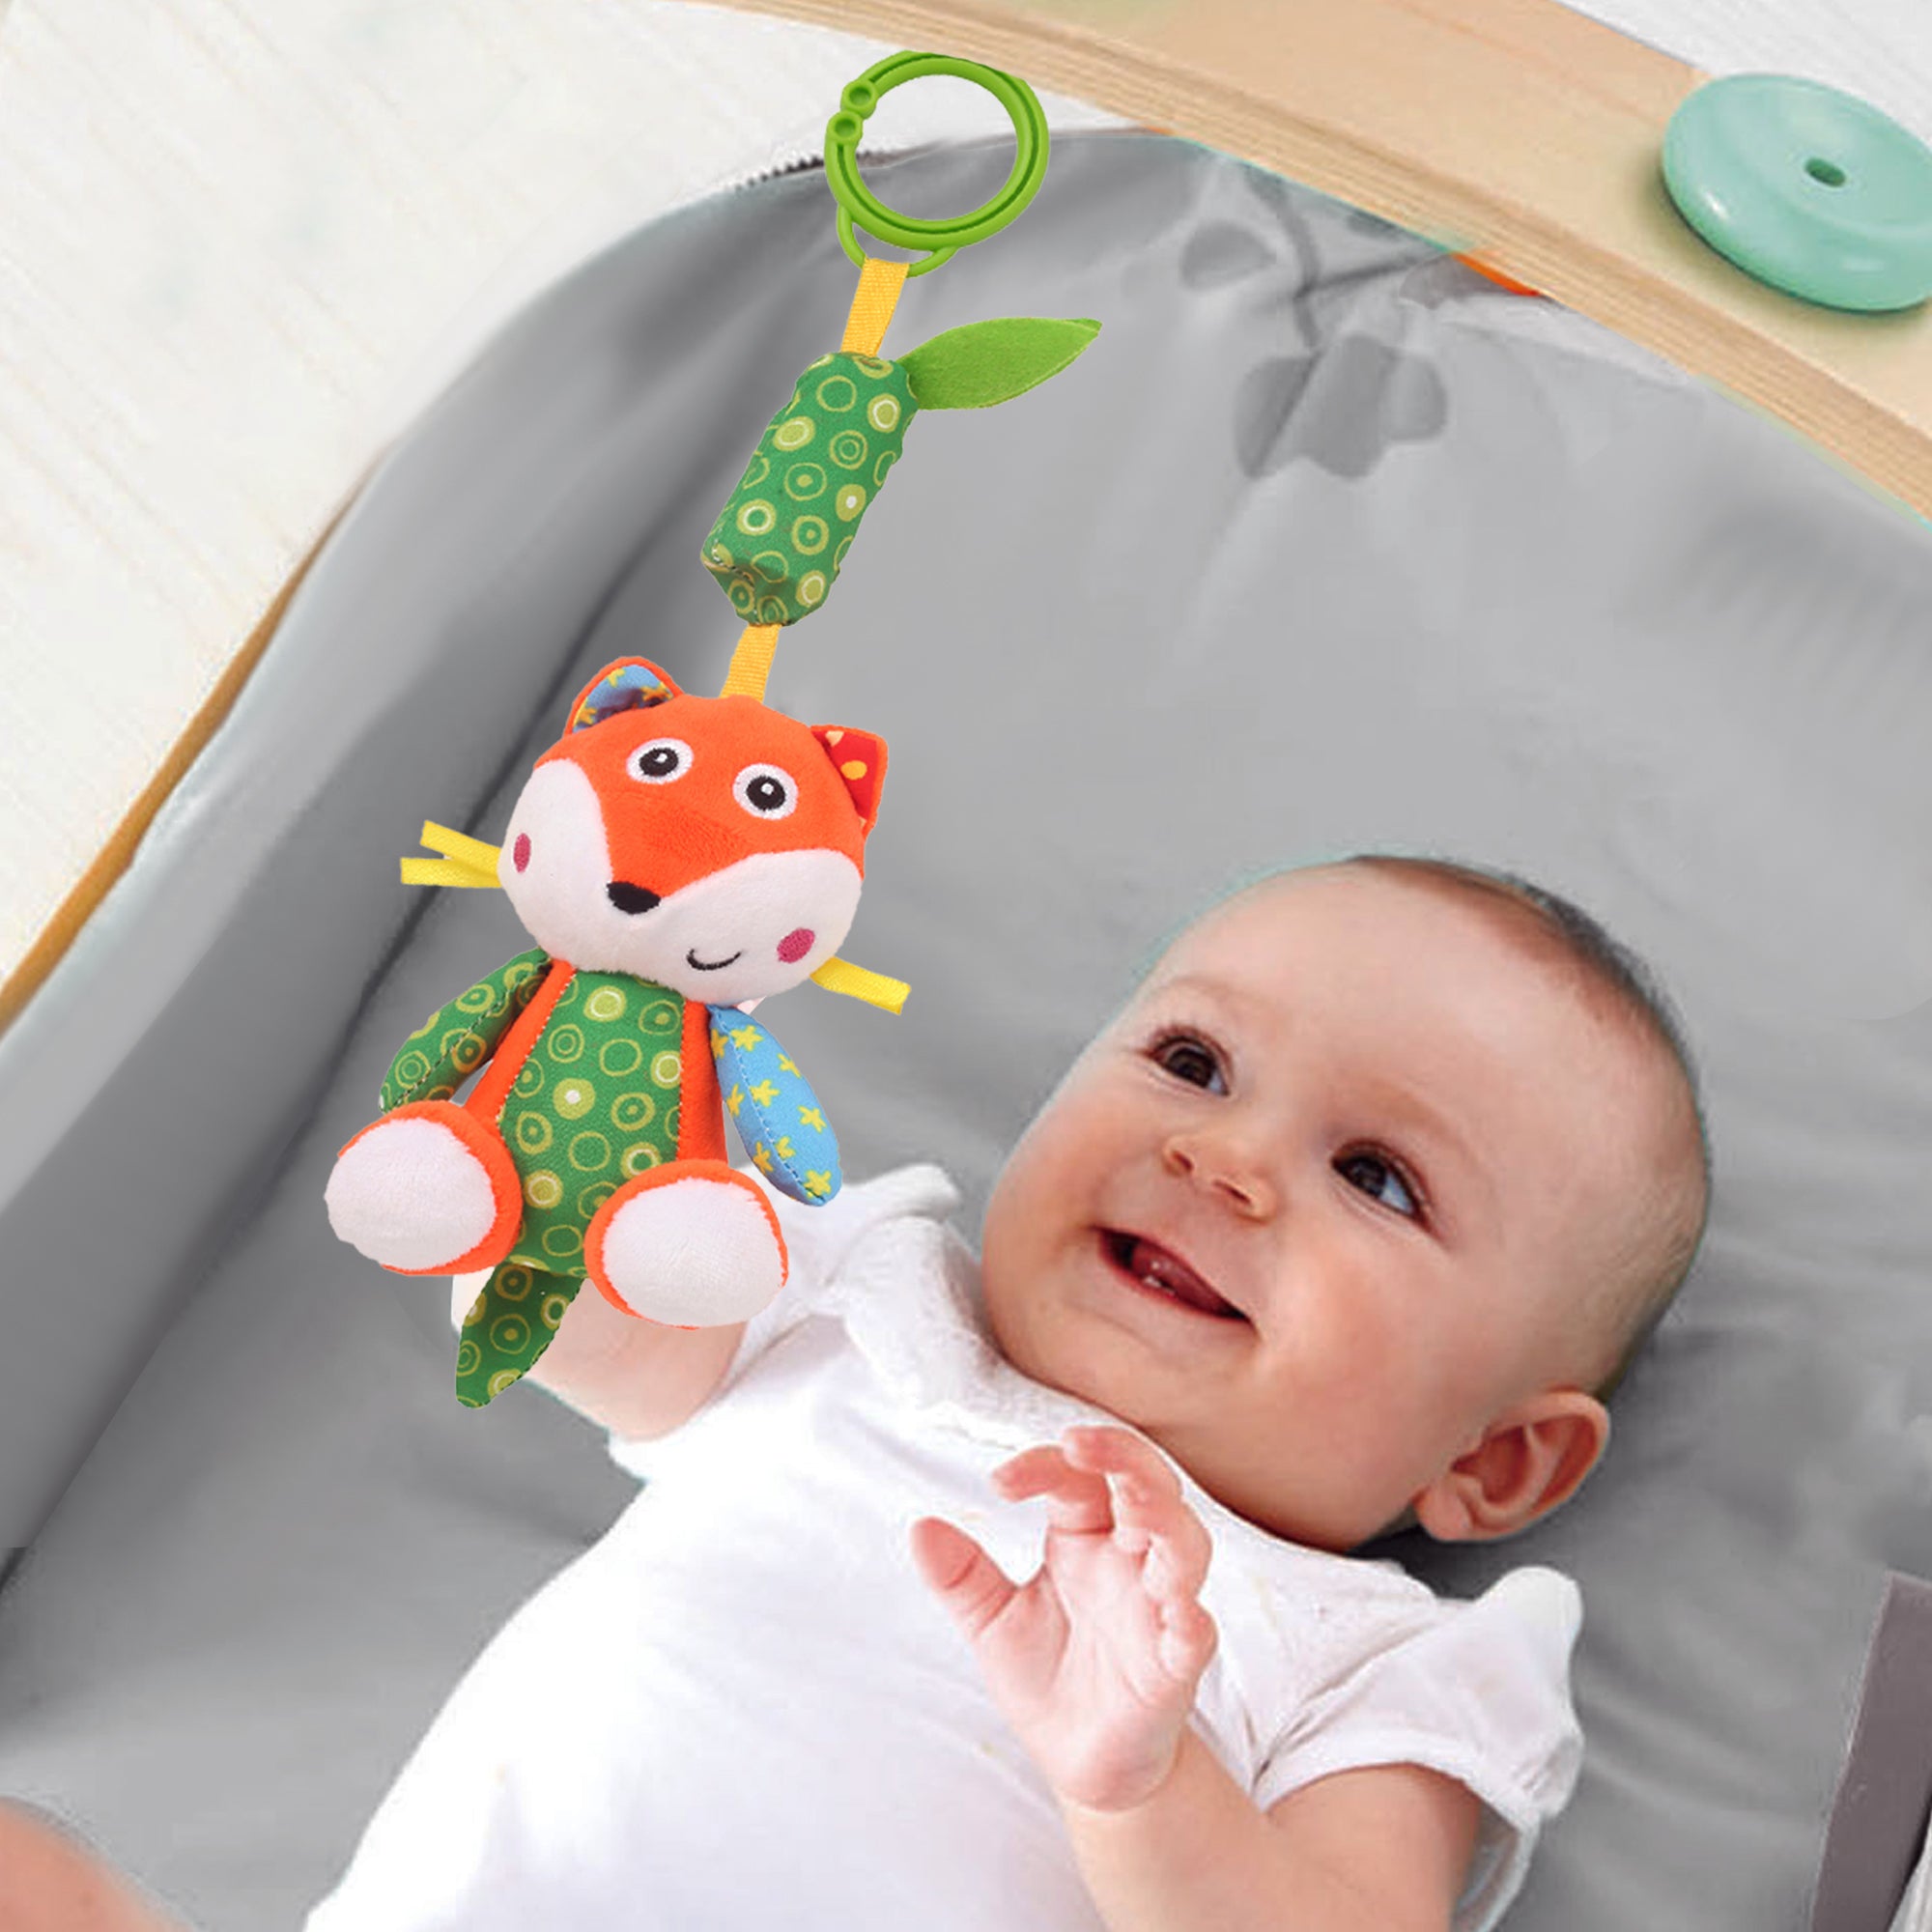 Fox Orange And Green Hanging Musical Toy - Baby Moo